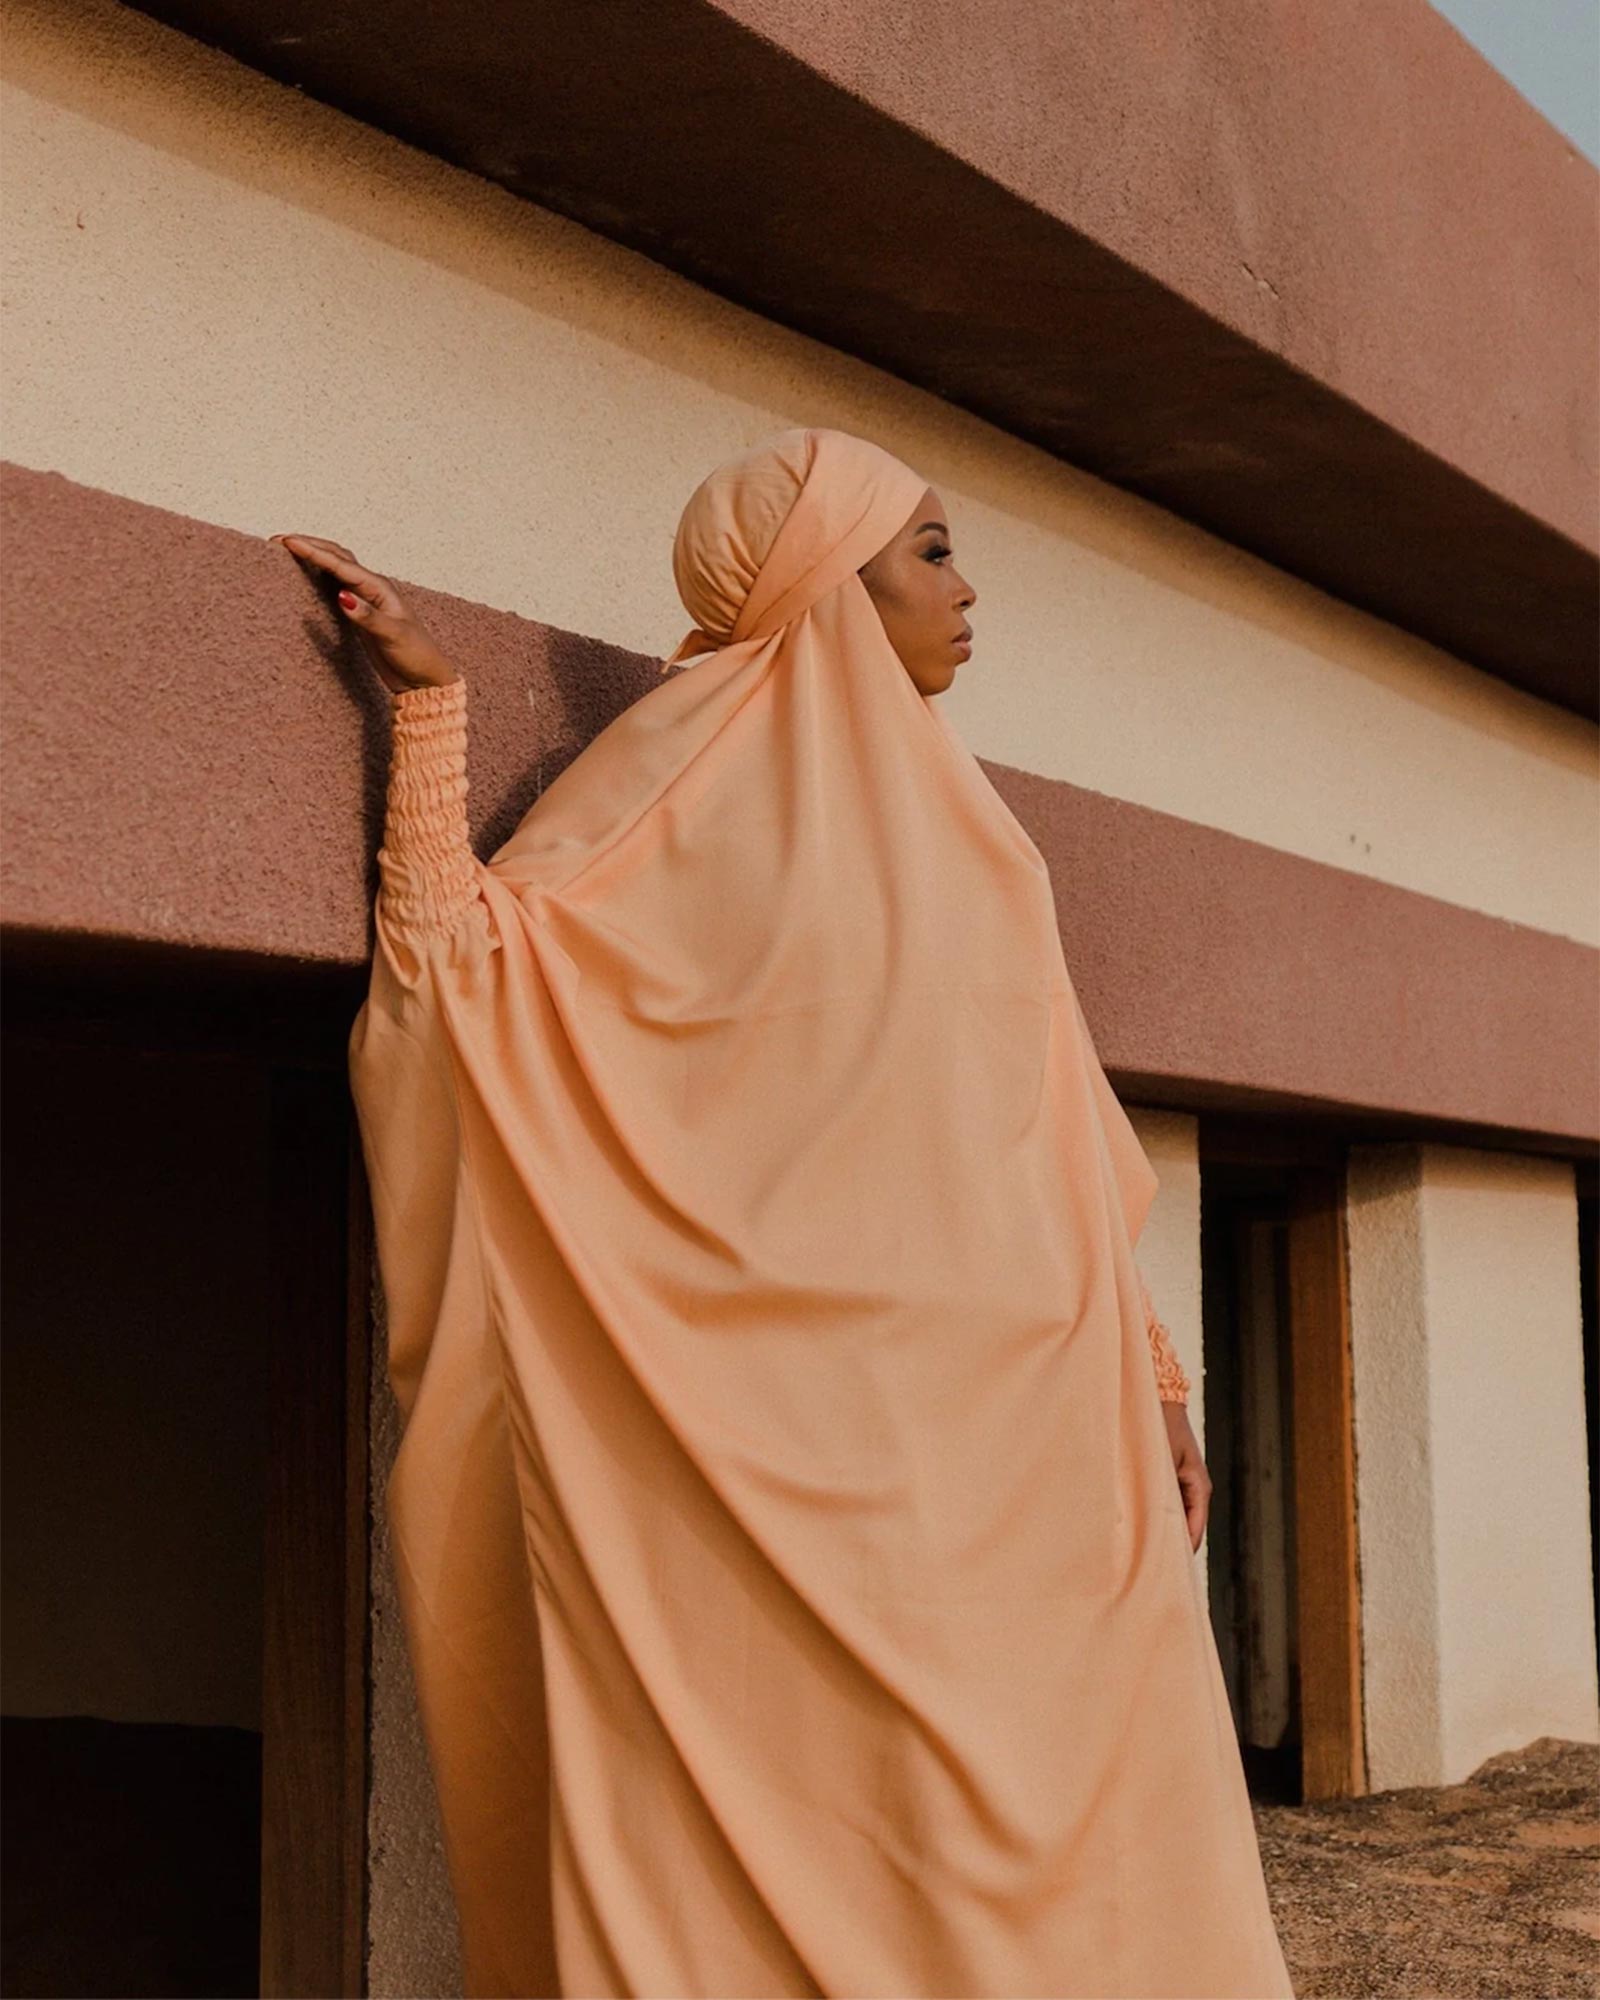 A creation by Nofa Deen, among the protagonists of the last Modest Fashion Week